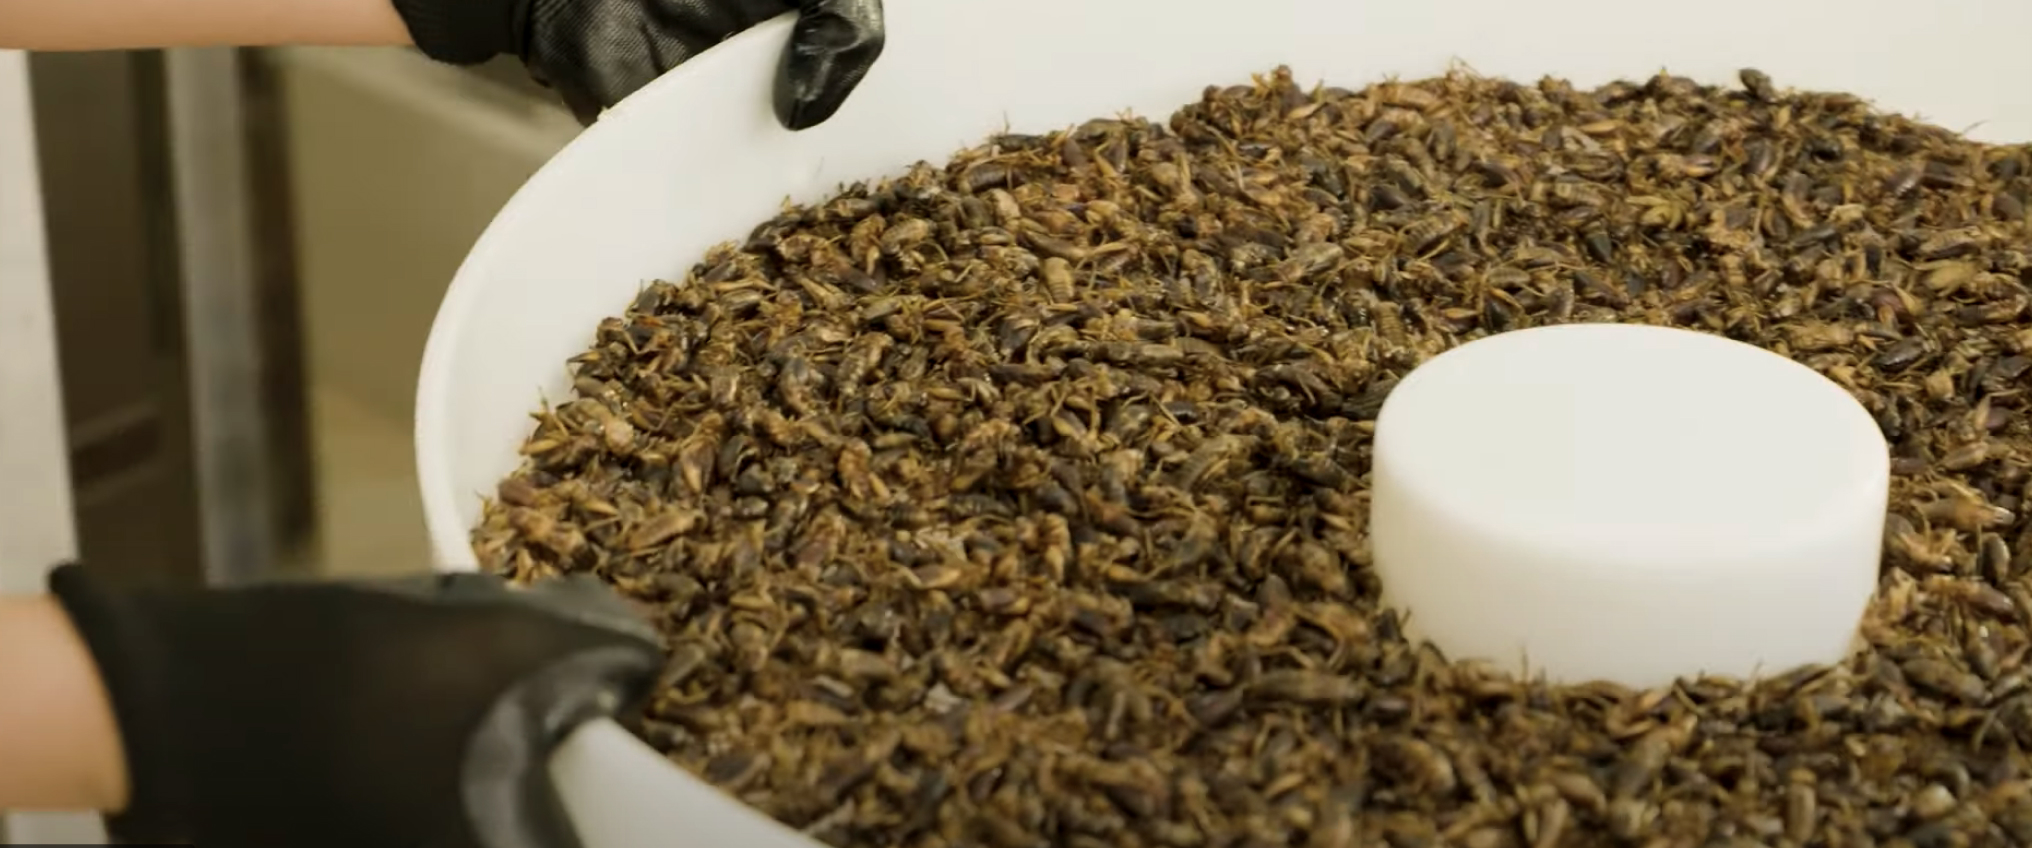 Insects as part of a circular economy for food: Insectipro/Sanergy